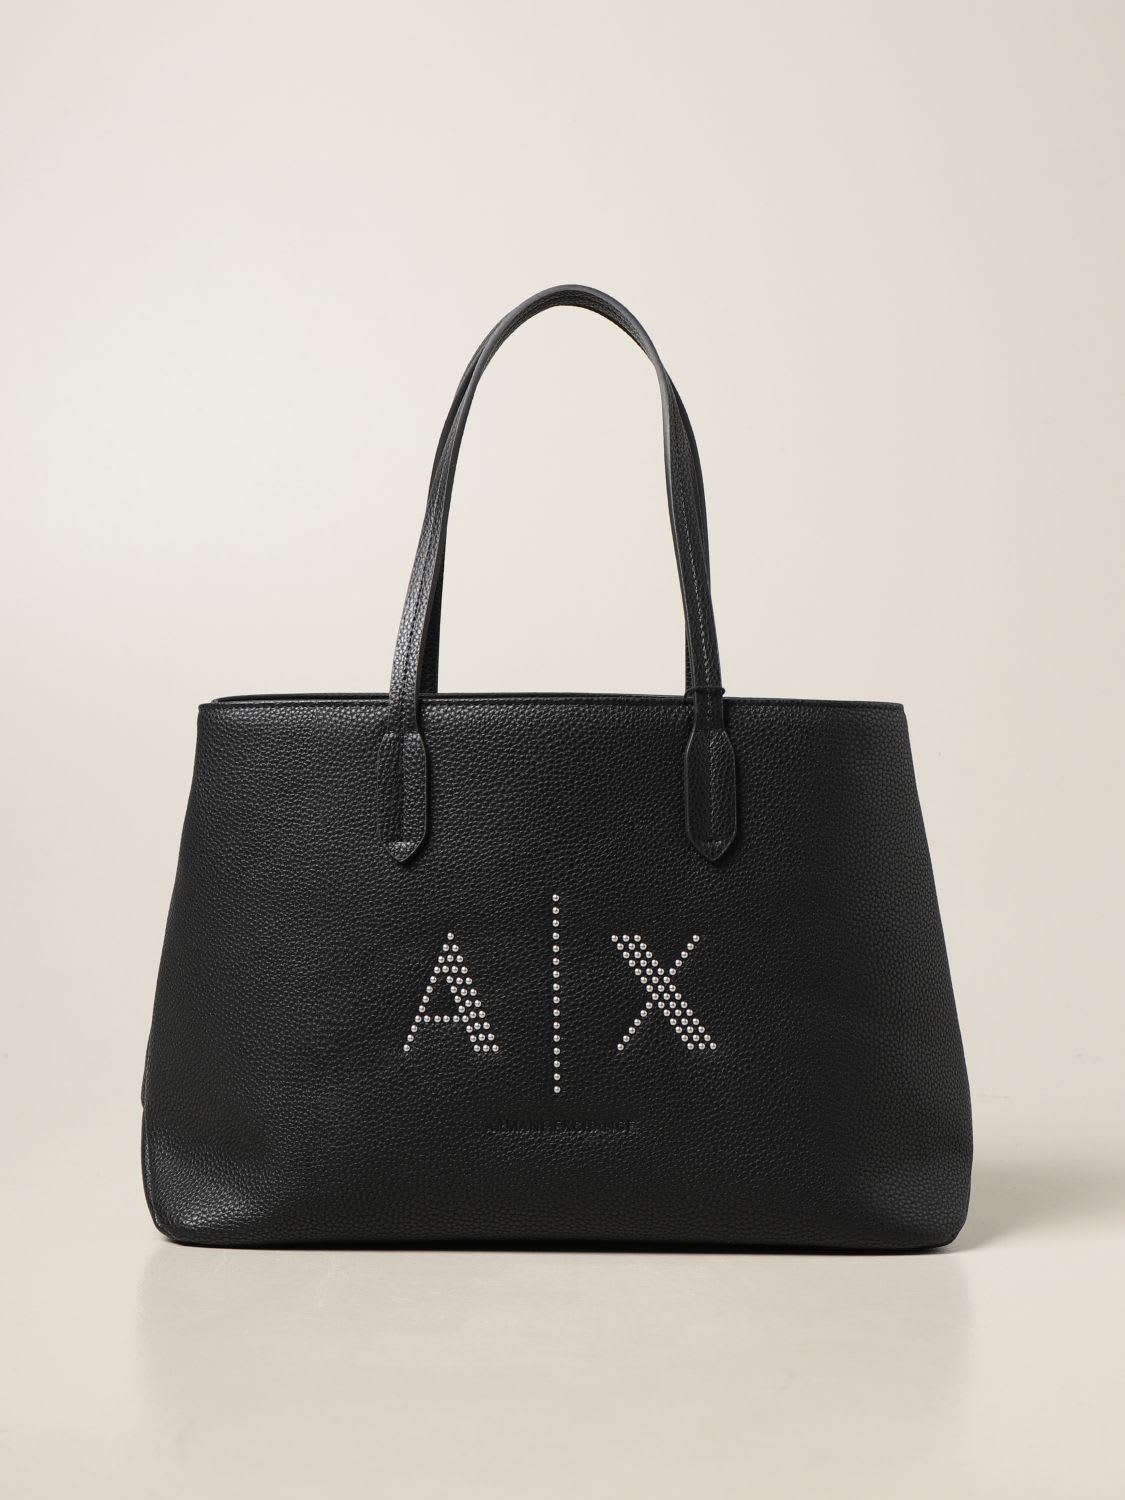 ARMANI COLLEZIONI ARMANI EXCHANGE TOTE BAGS ARMANI EXCHANGE SHOULDER BAG IN SYNTHETIC TEXTURED LEATHER,942698 CC530 00020